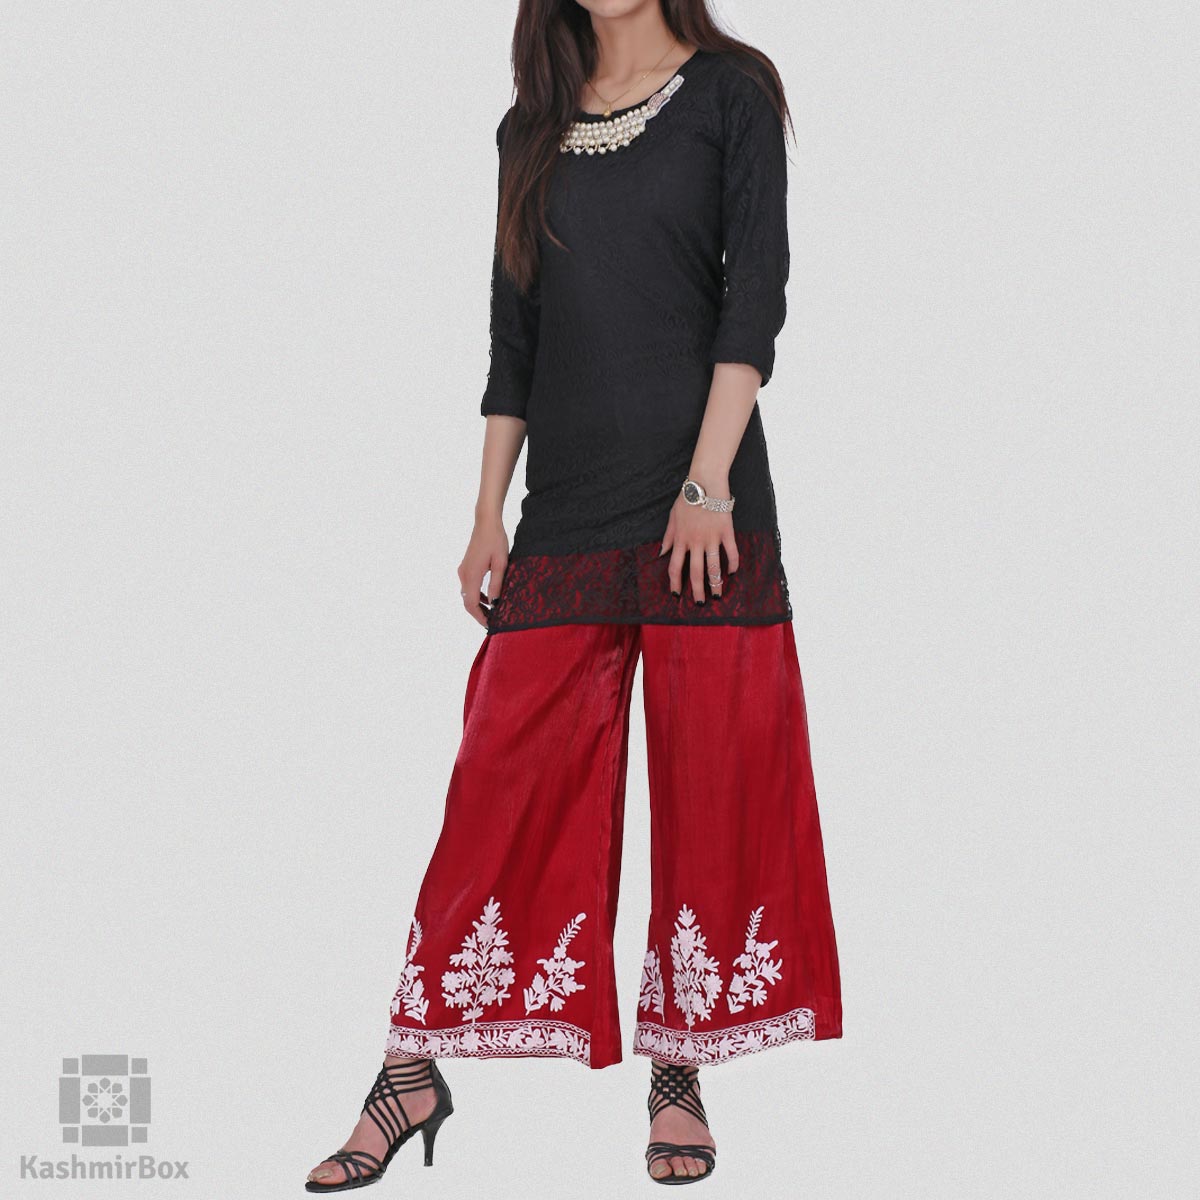 Cotton silk handkerchief hemline top detailed with attached tassels along  with flared dhoti pants